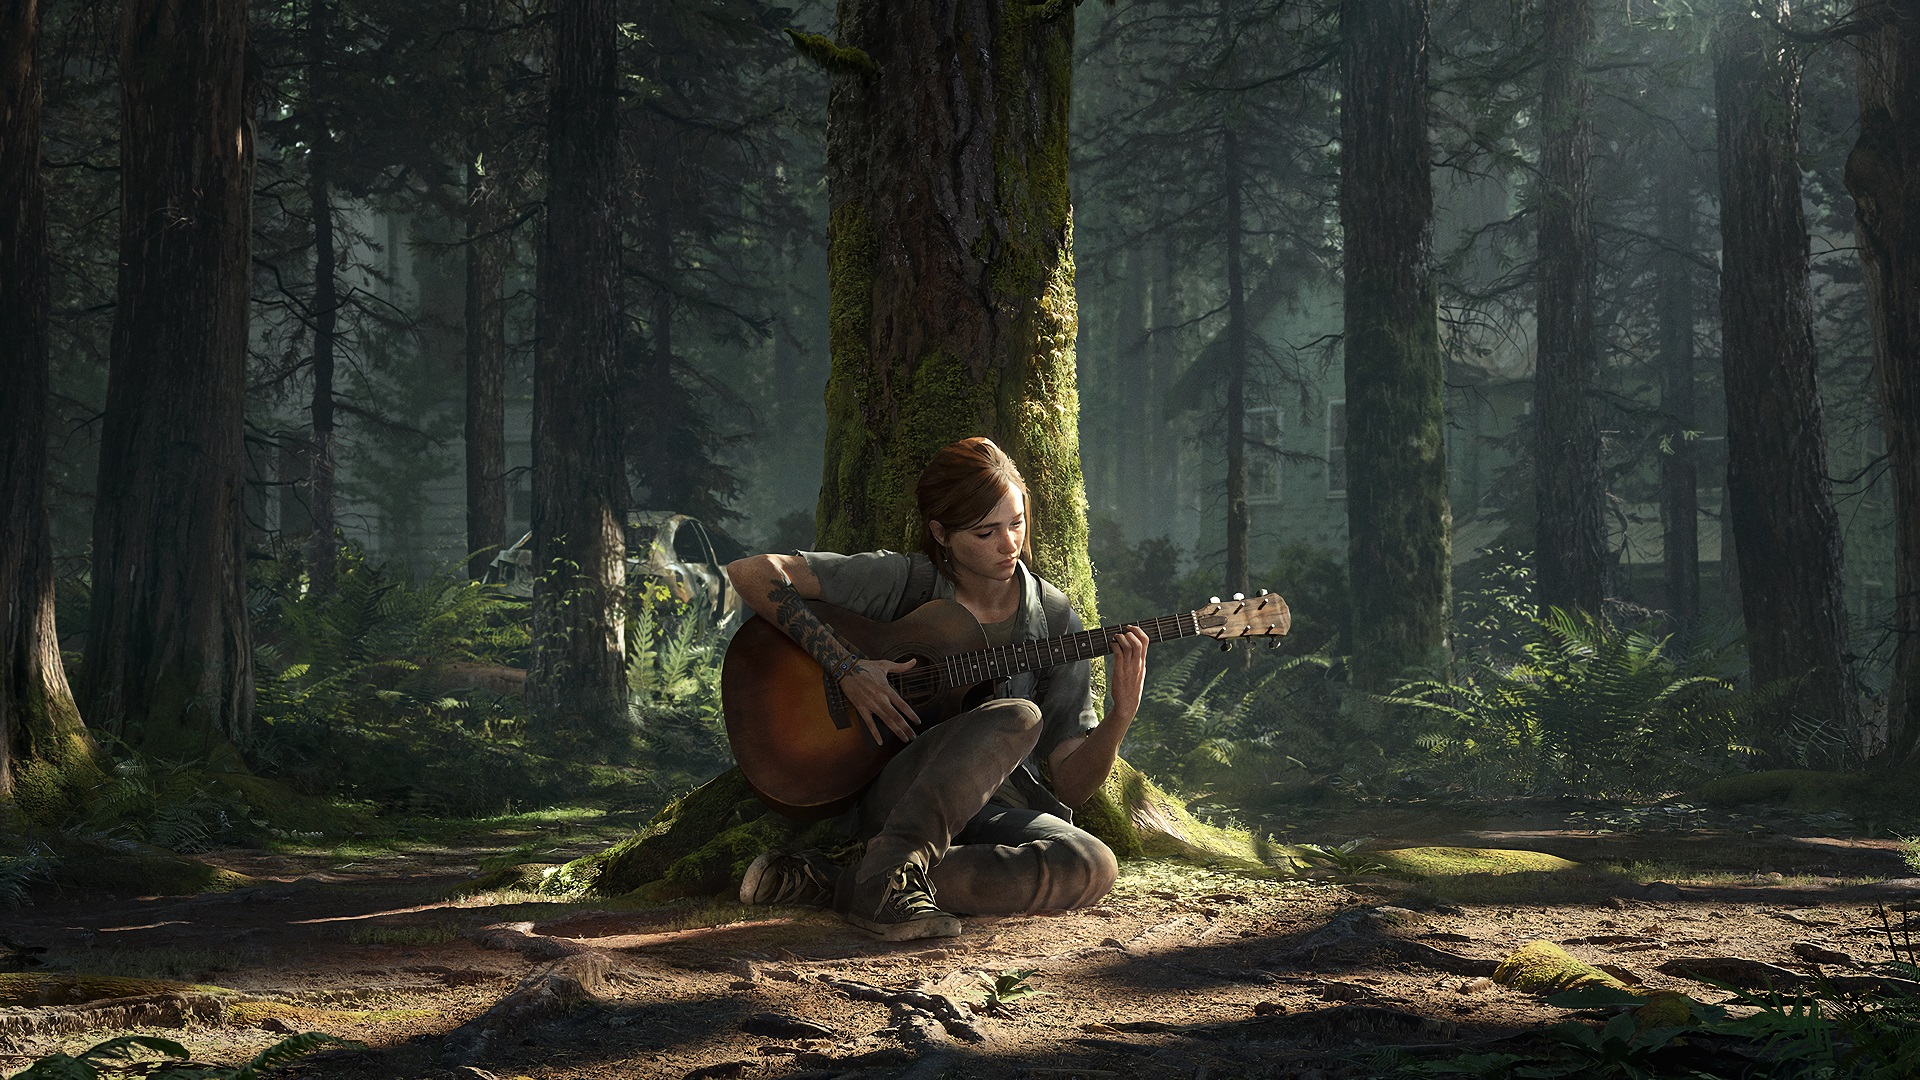  The Last of Us,  Part II     : Naughty Dog  Summer Game Fest 2022